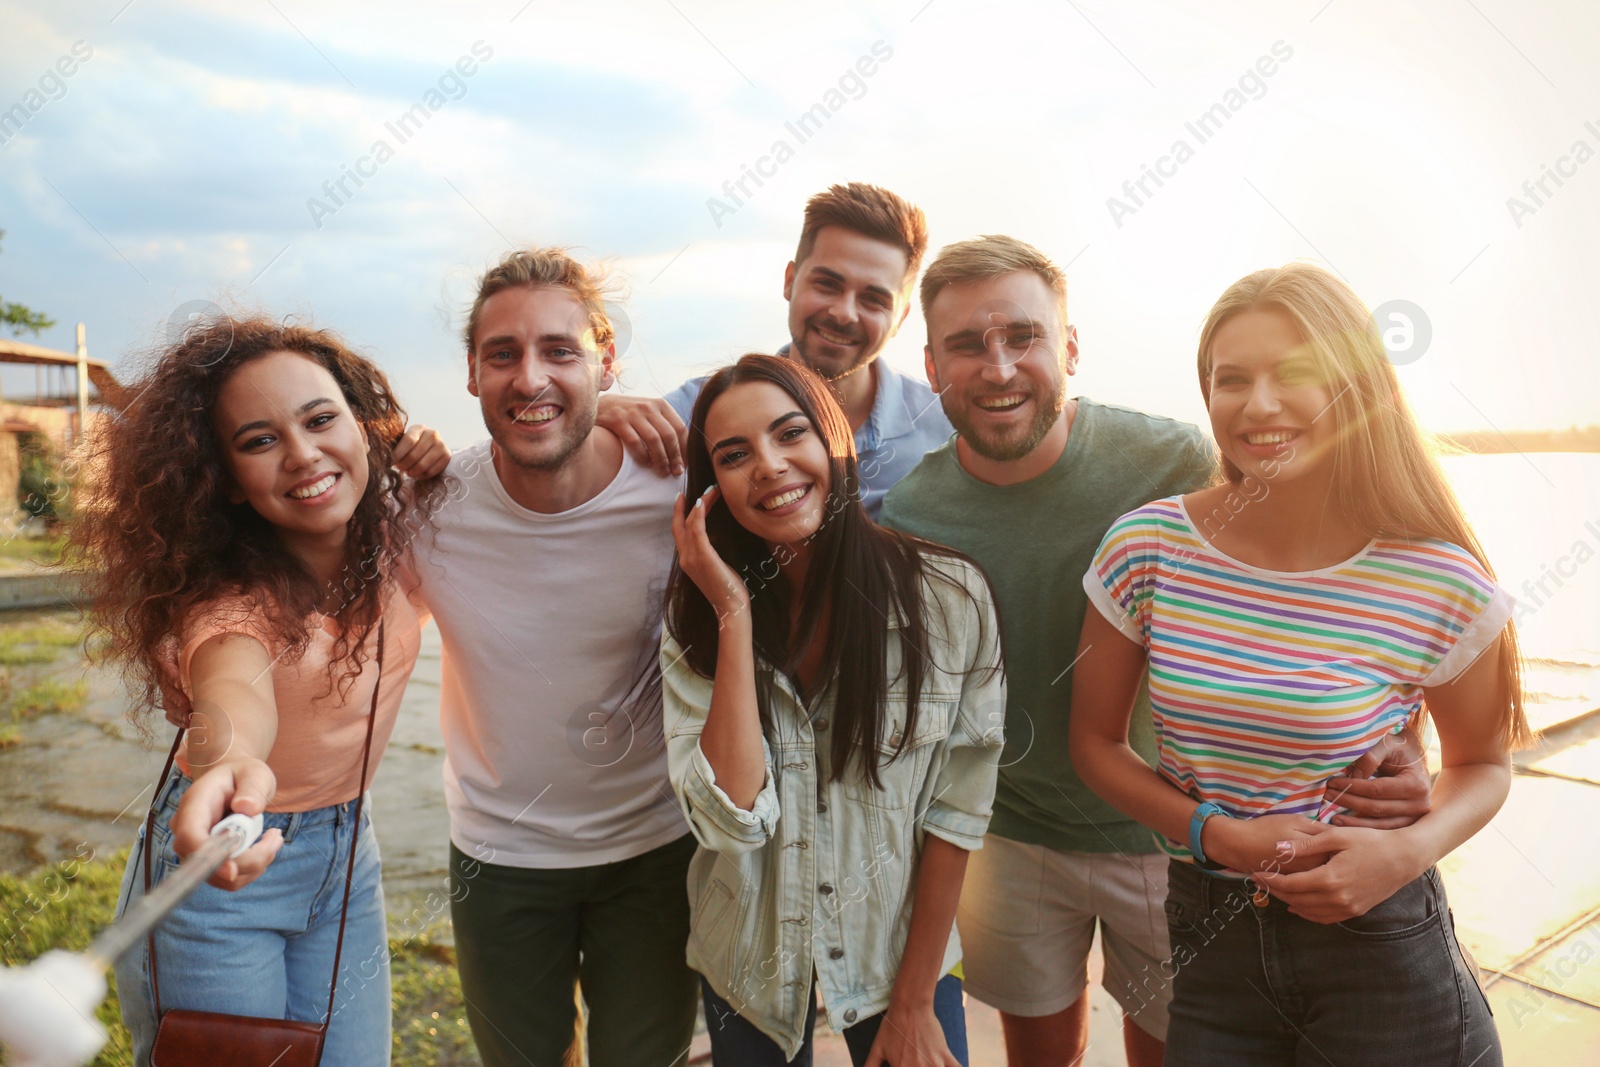 Photo of Happy young people taking selfie outdoors on sunny day